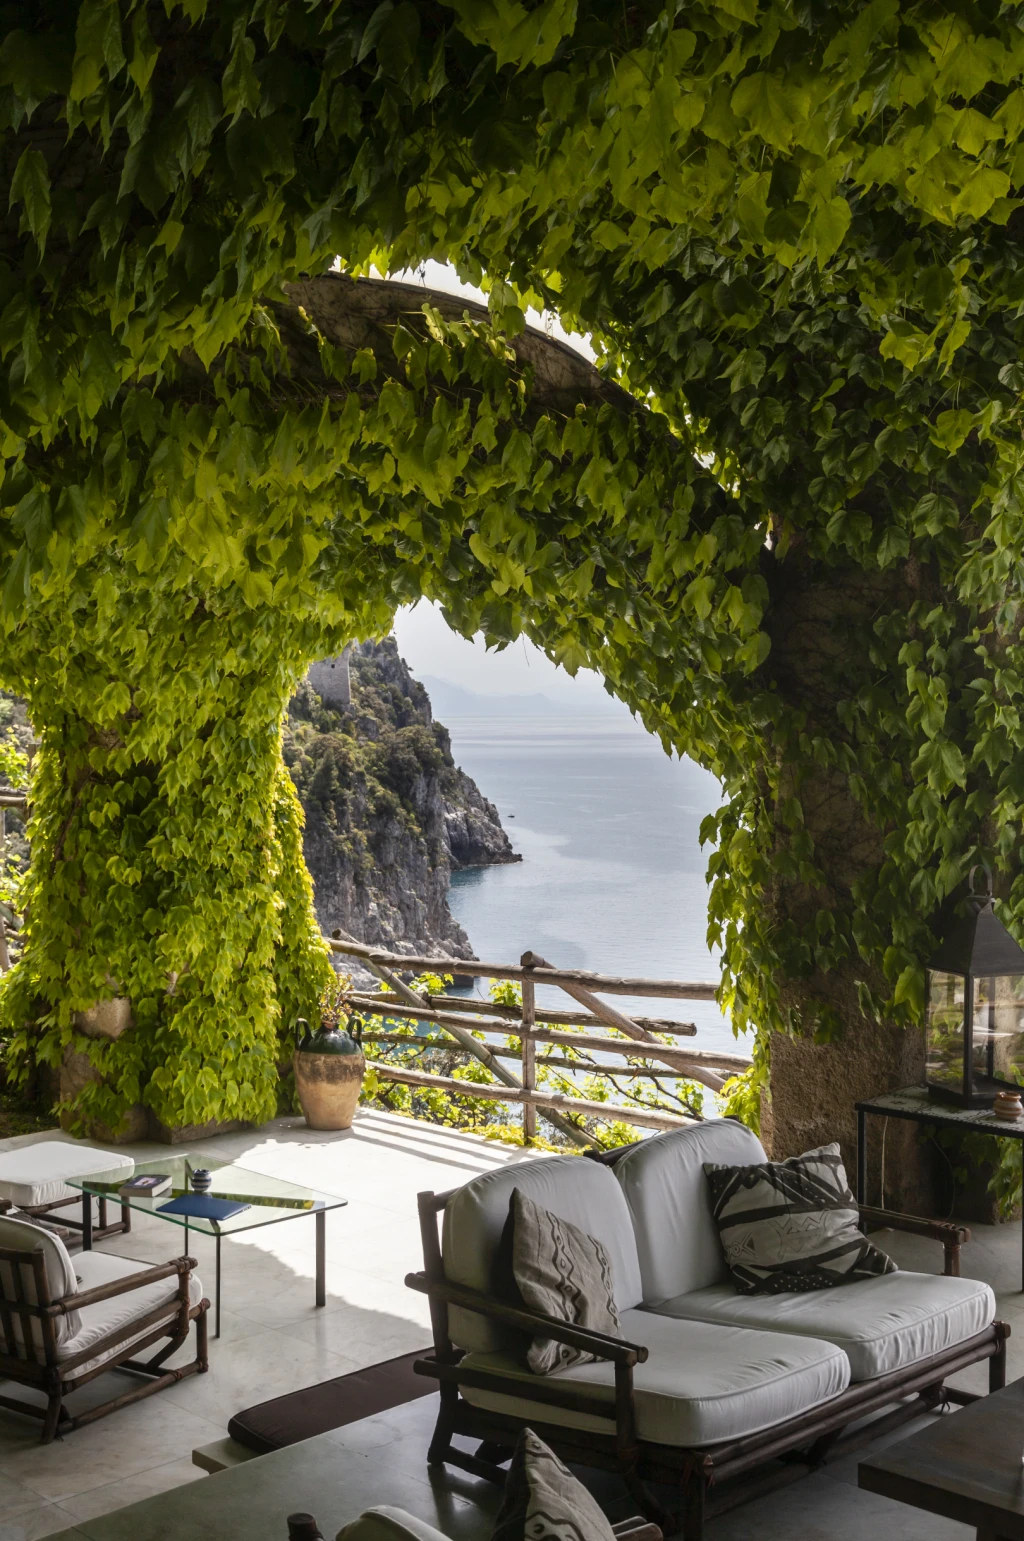 Enjoy an aperitivo or unforgettable dinner on the alluring terrace with breathtaking views